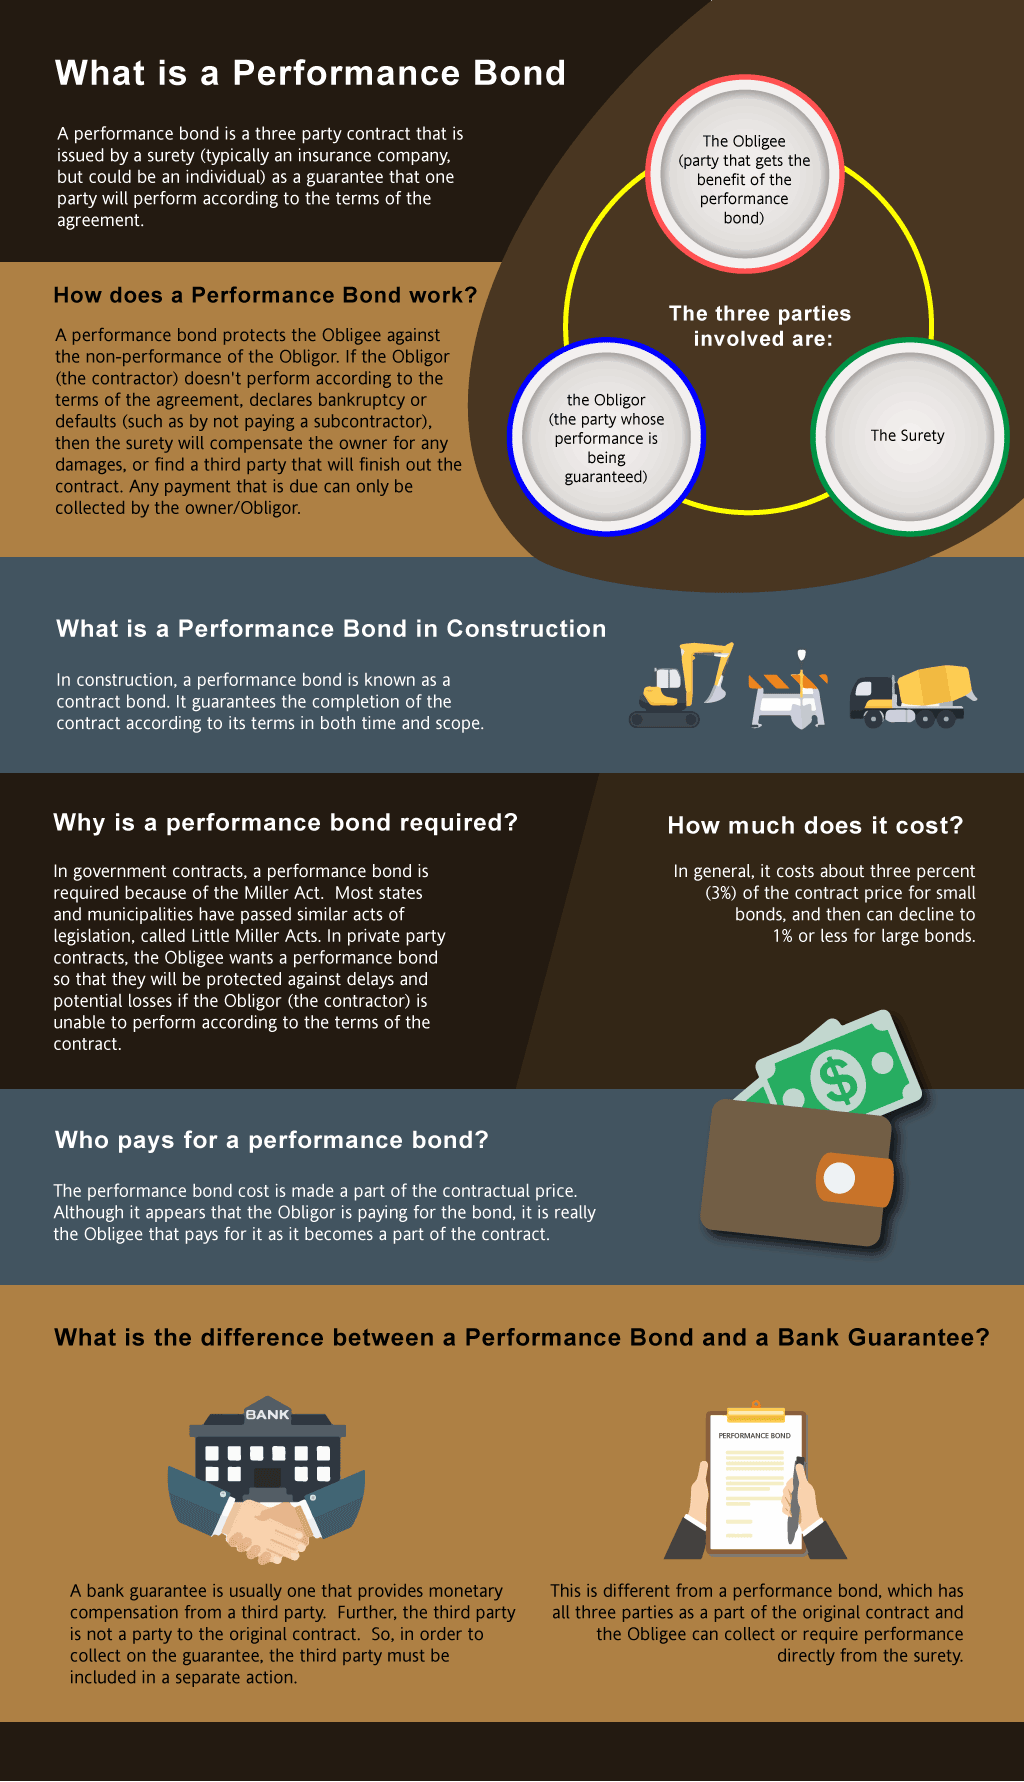 What's a performance bond?